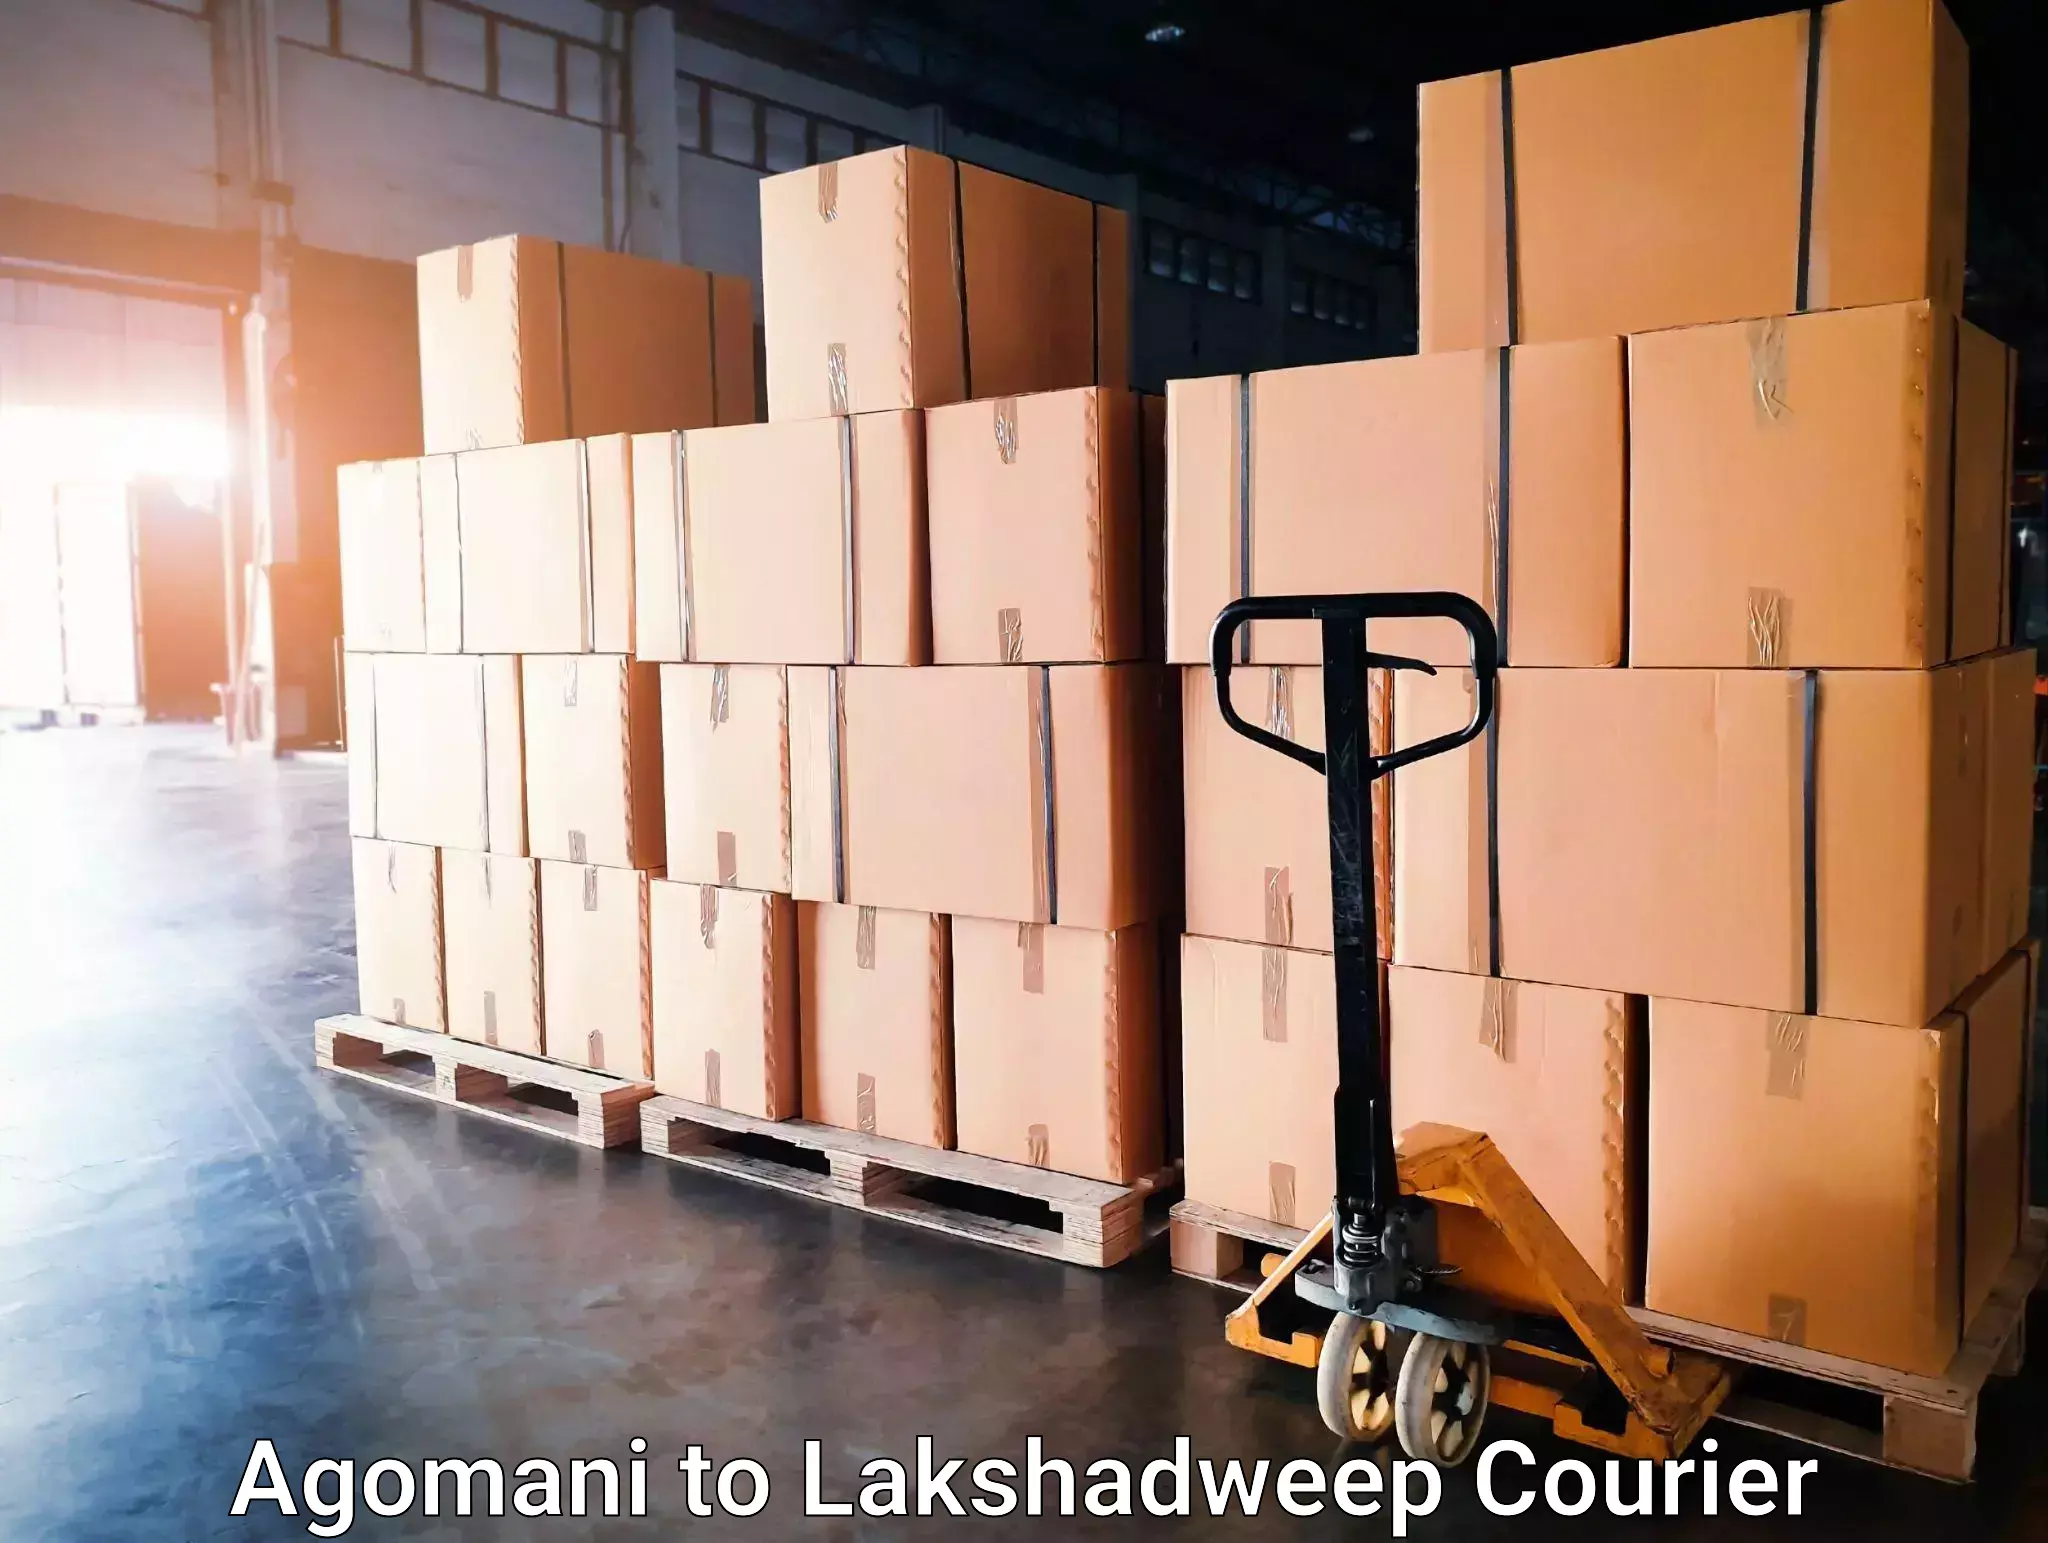 Business delivery service Agomani to Lakshadweep